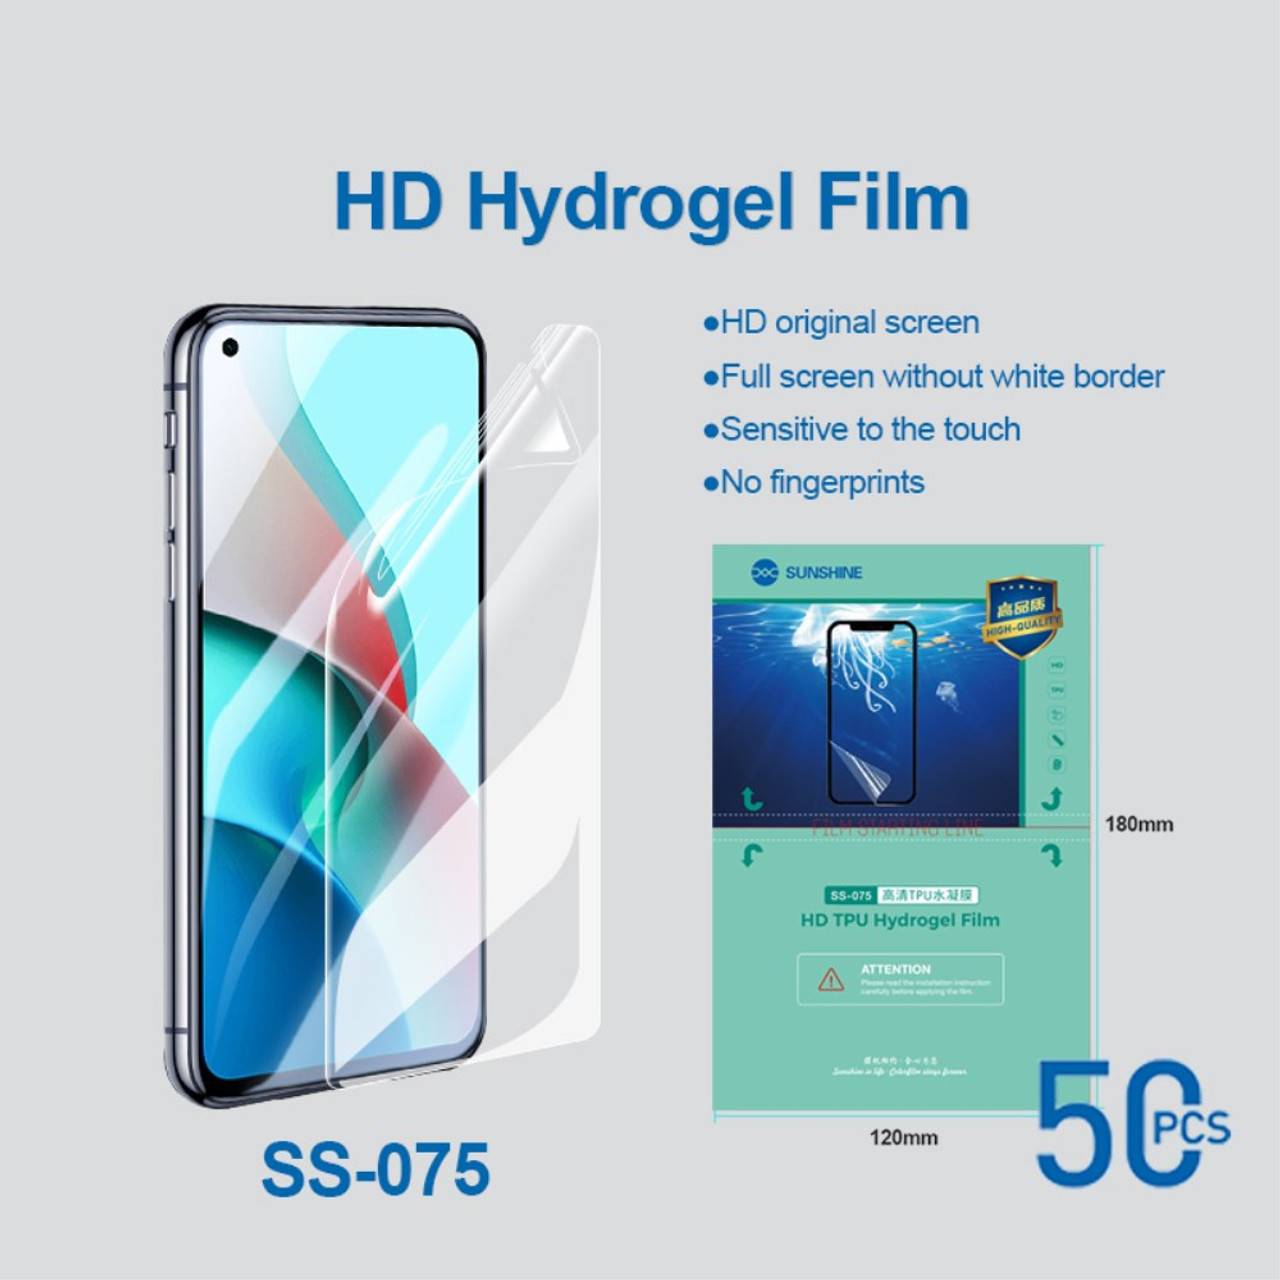 50Pcs/Pack SUNSHINE SS-075 4K Ultra Clear Flexible Hydrogel Protective Film for SS-890 Cutting Machine, Front/Rear Phone Protective Film for All Mobile Phones